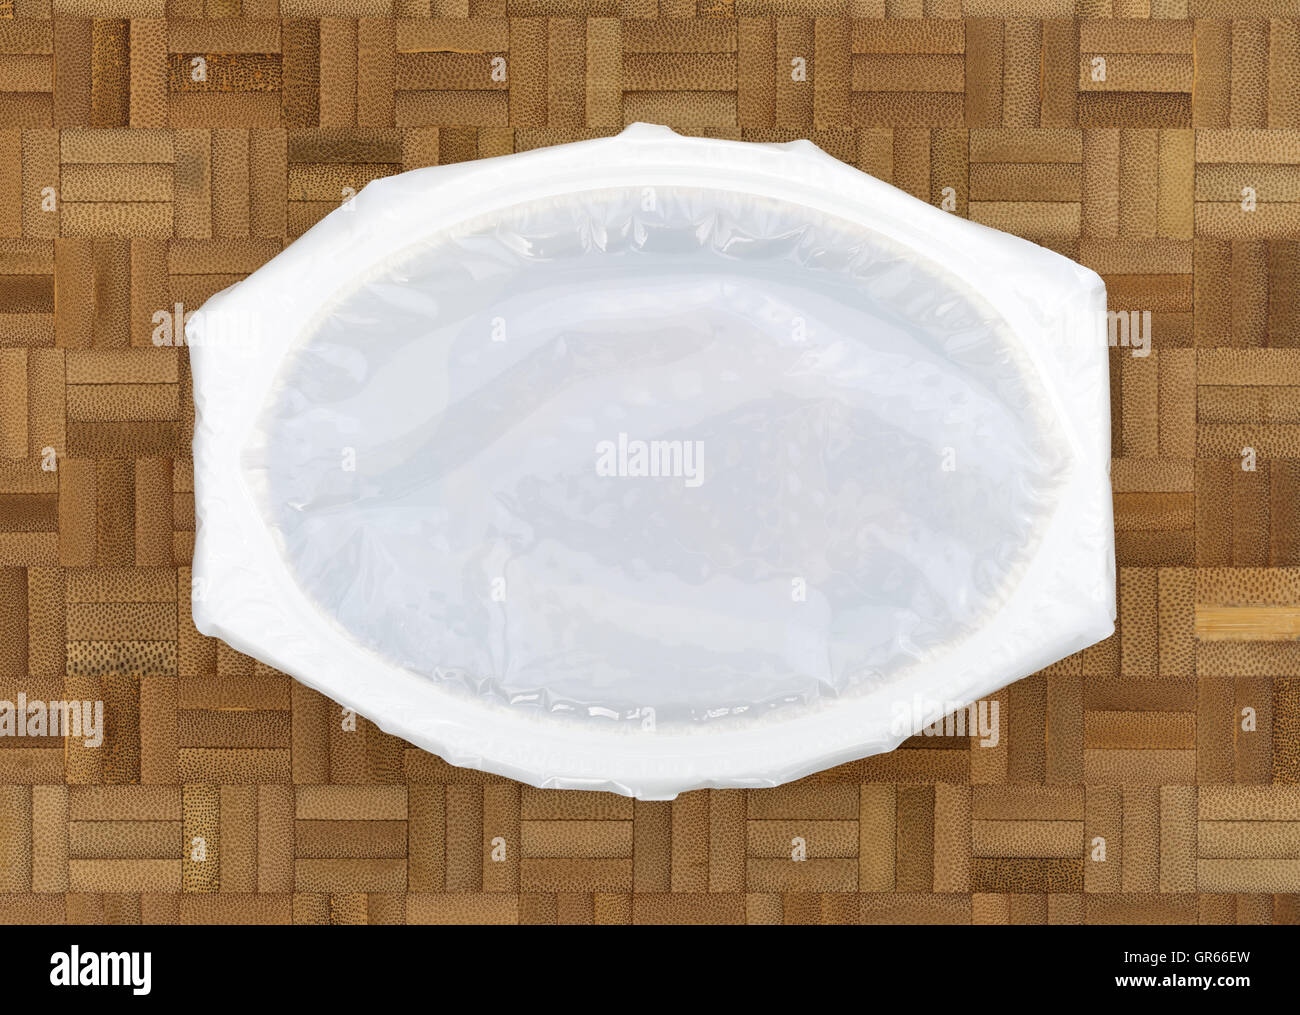 Top view of an unopened TV dinner on a wood block cutting board. Stock Photo